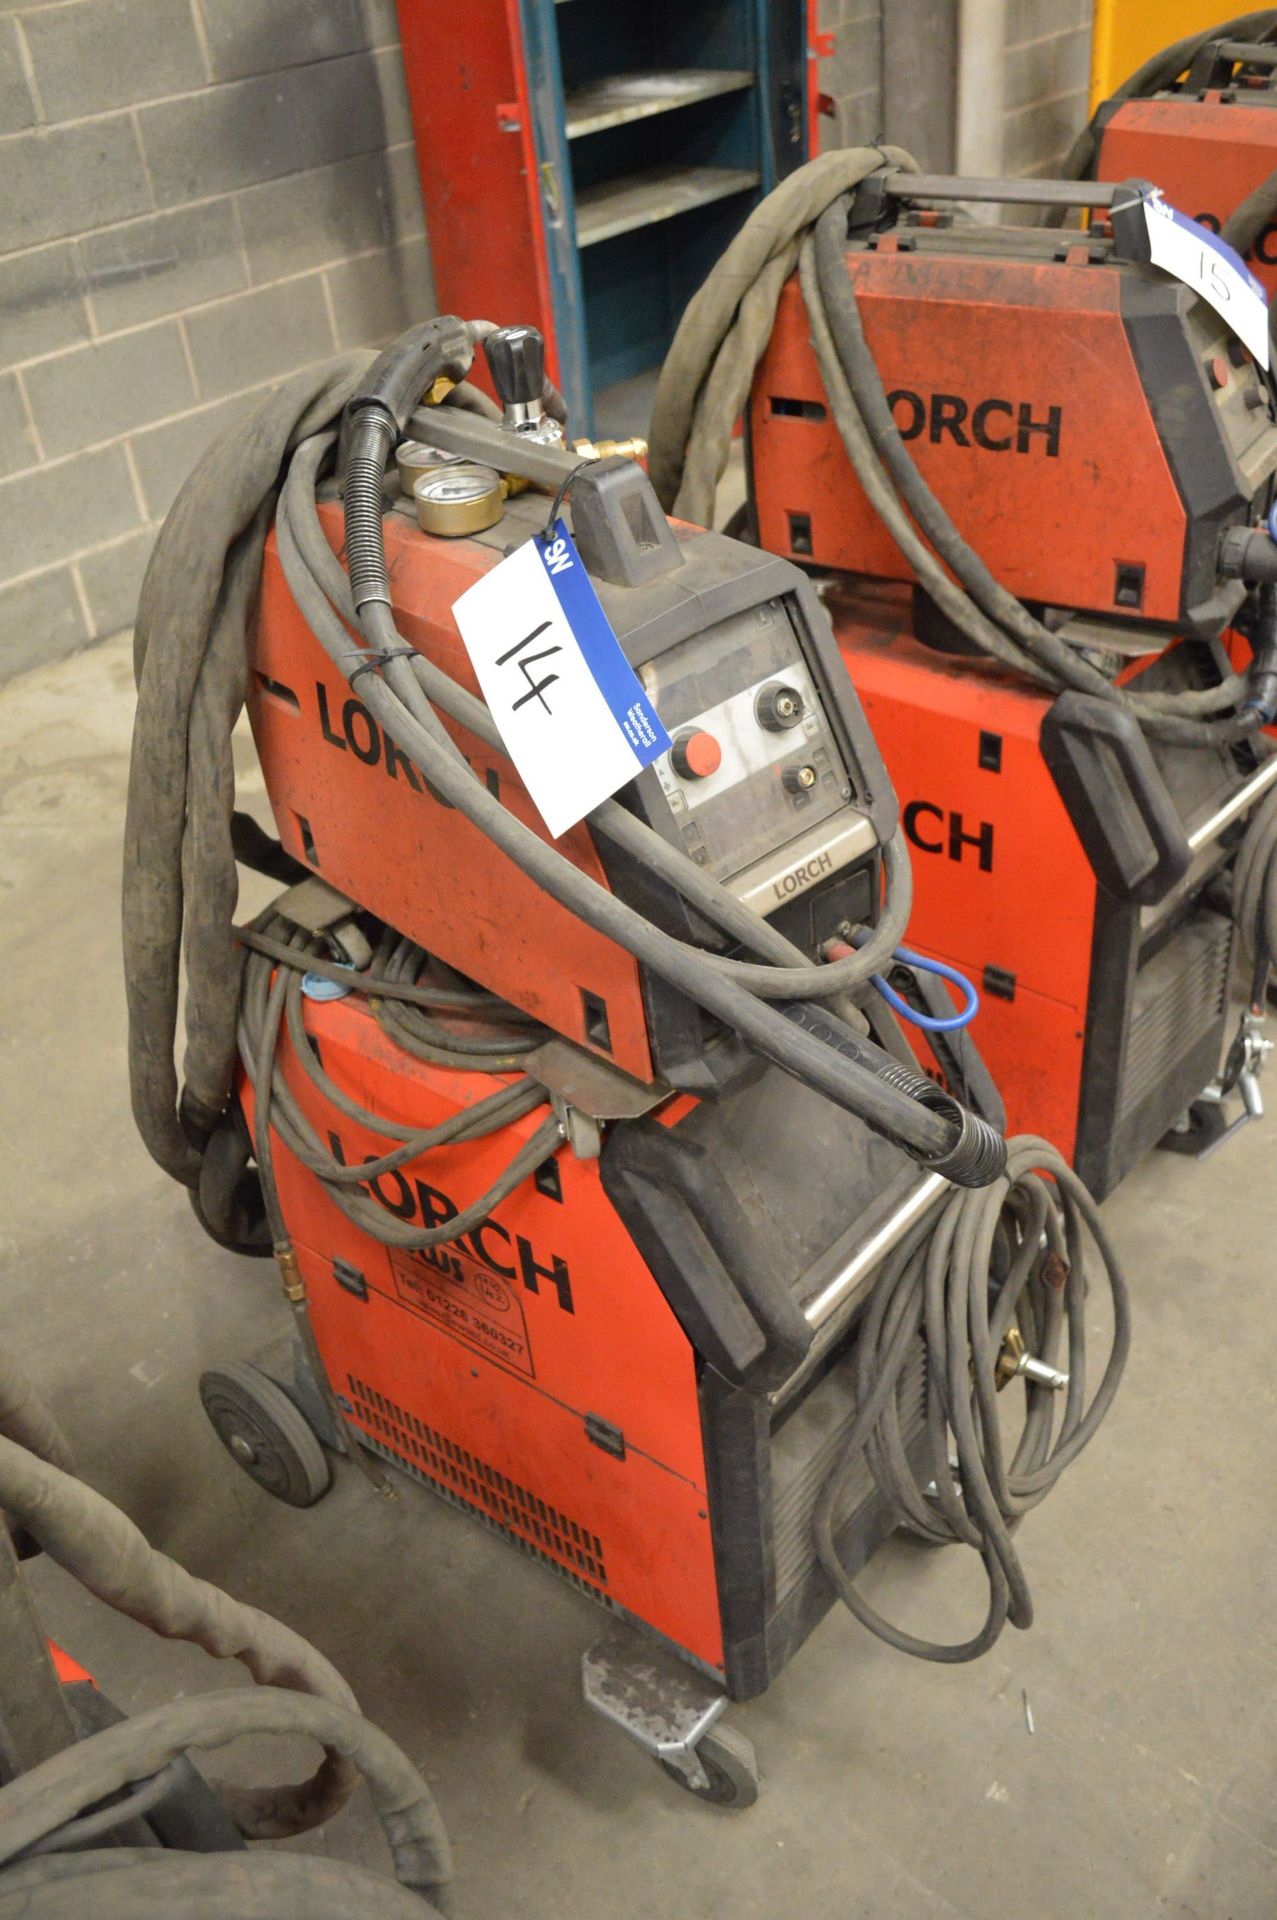 Lorch Micormig 400 Mig Welding Rectifier, serial no. 4062-2631-0003-9, with wire feed unit